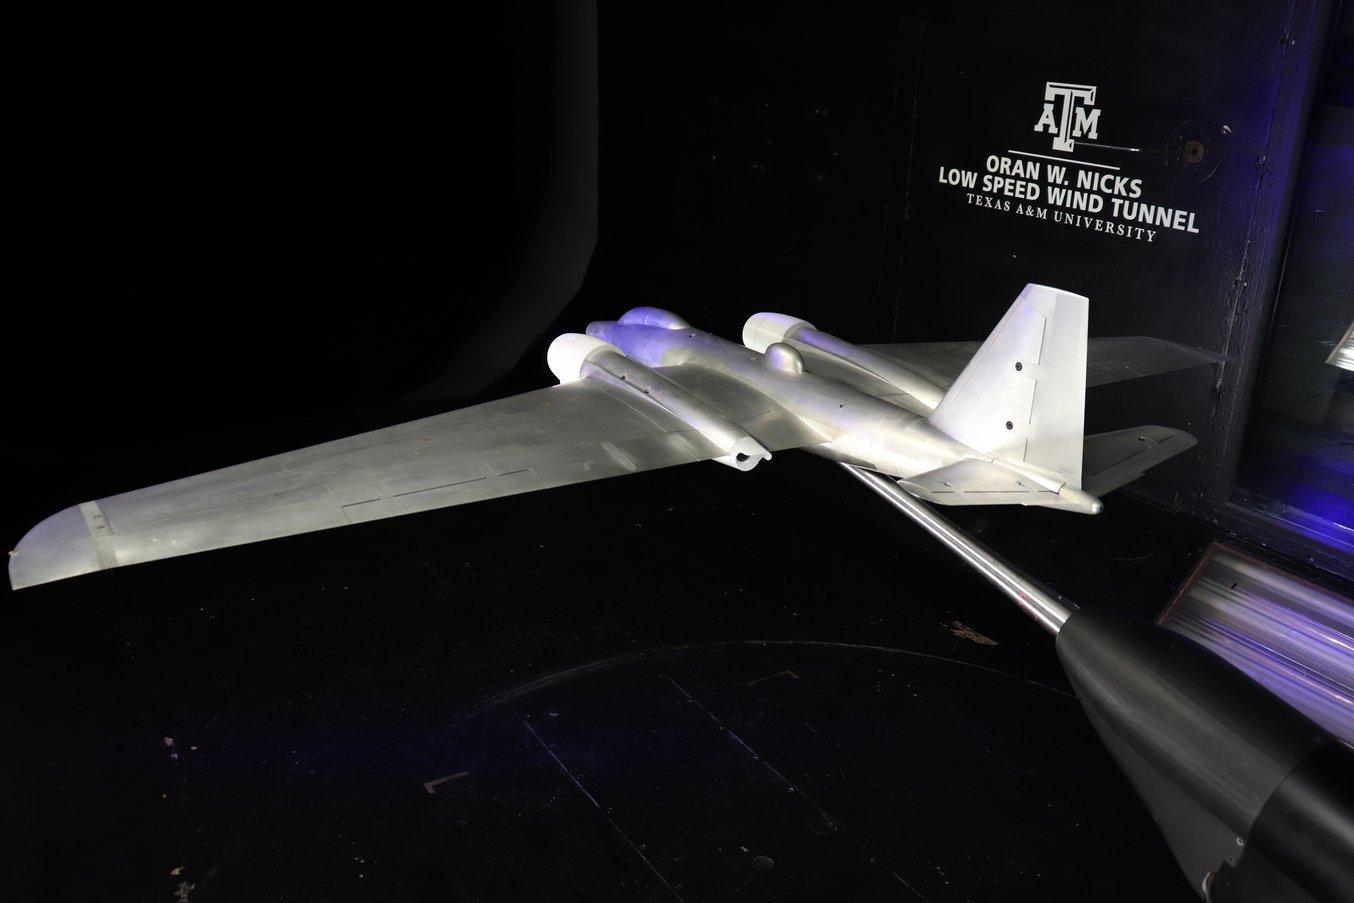 A scale model of an airplane, including some 3D printed components, mounted in a wind tunnel.